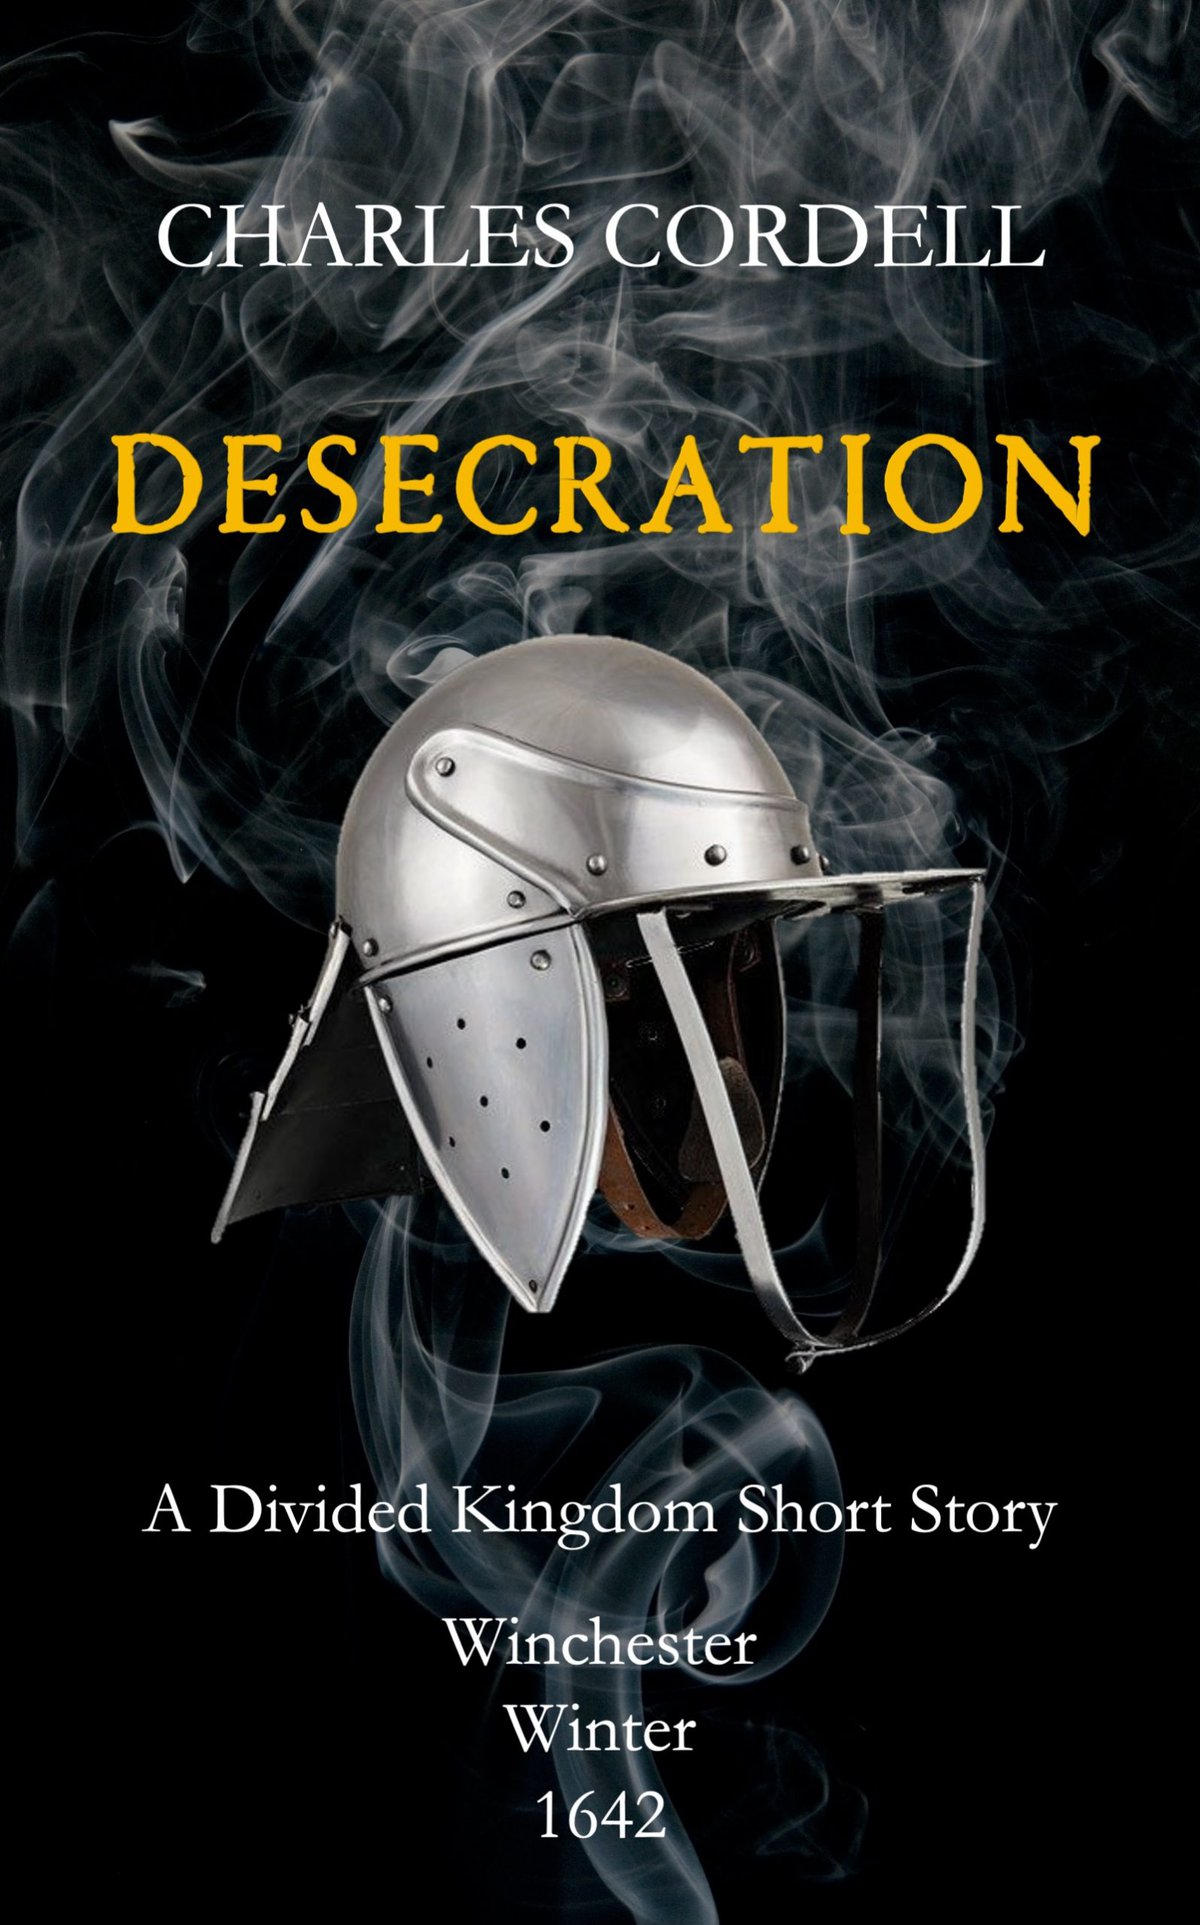 Desecration - Winchester 1642 - an English Civil War short story by Charles Cordell